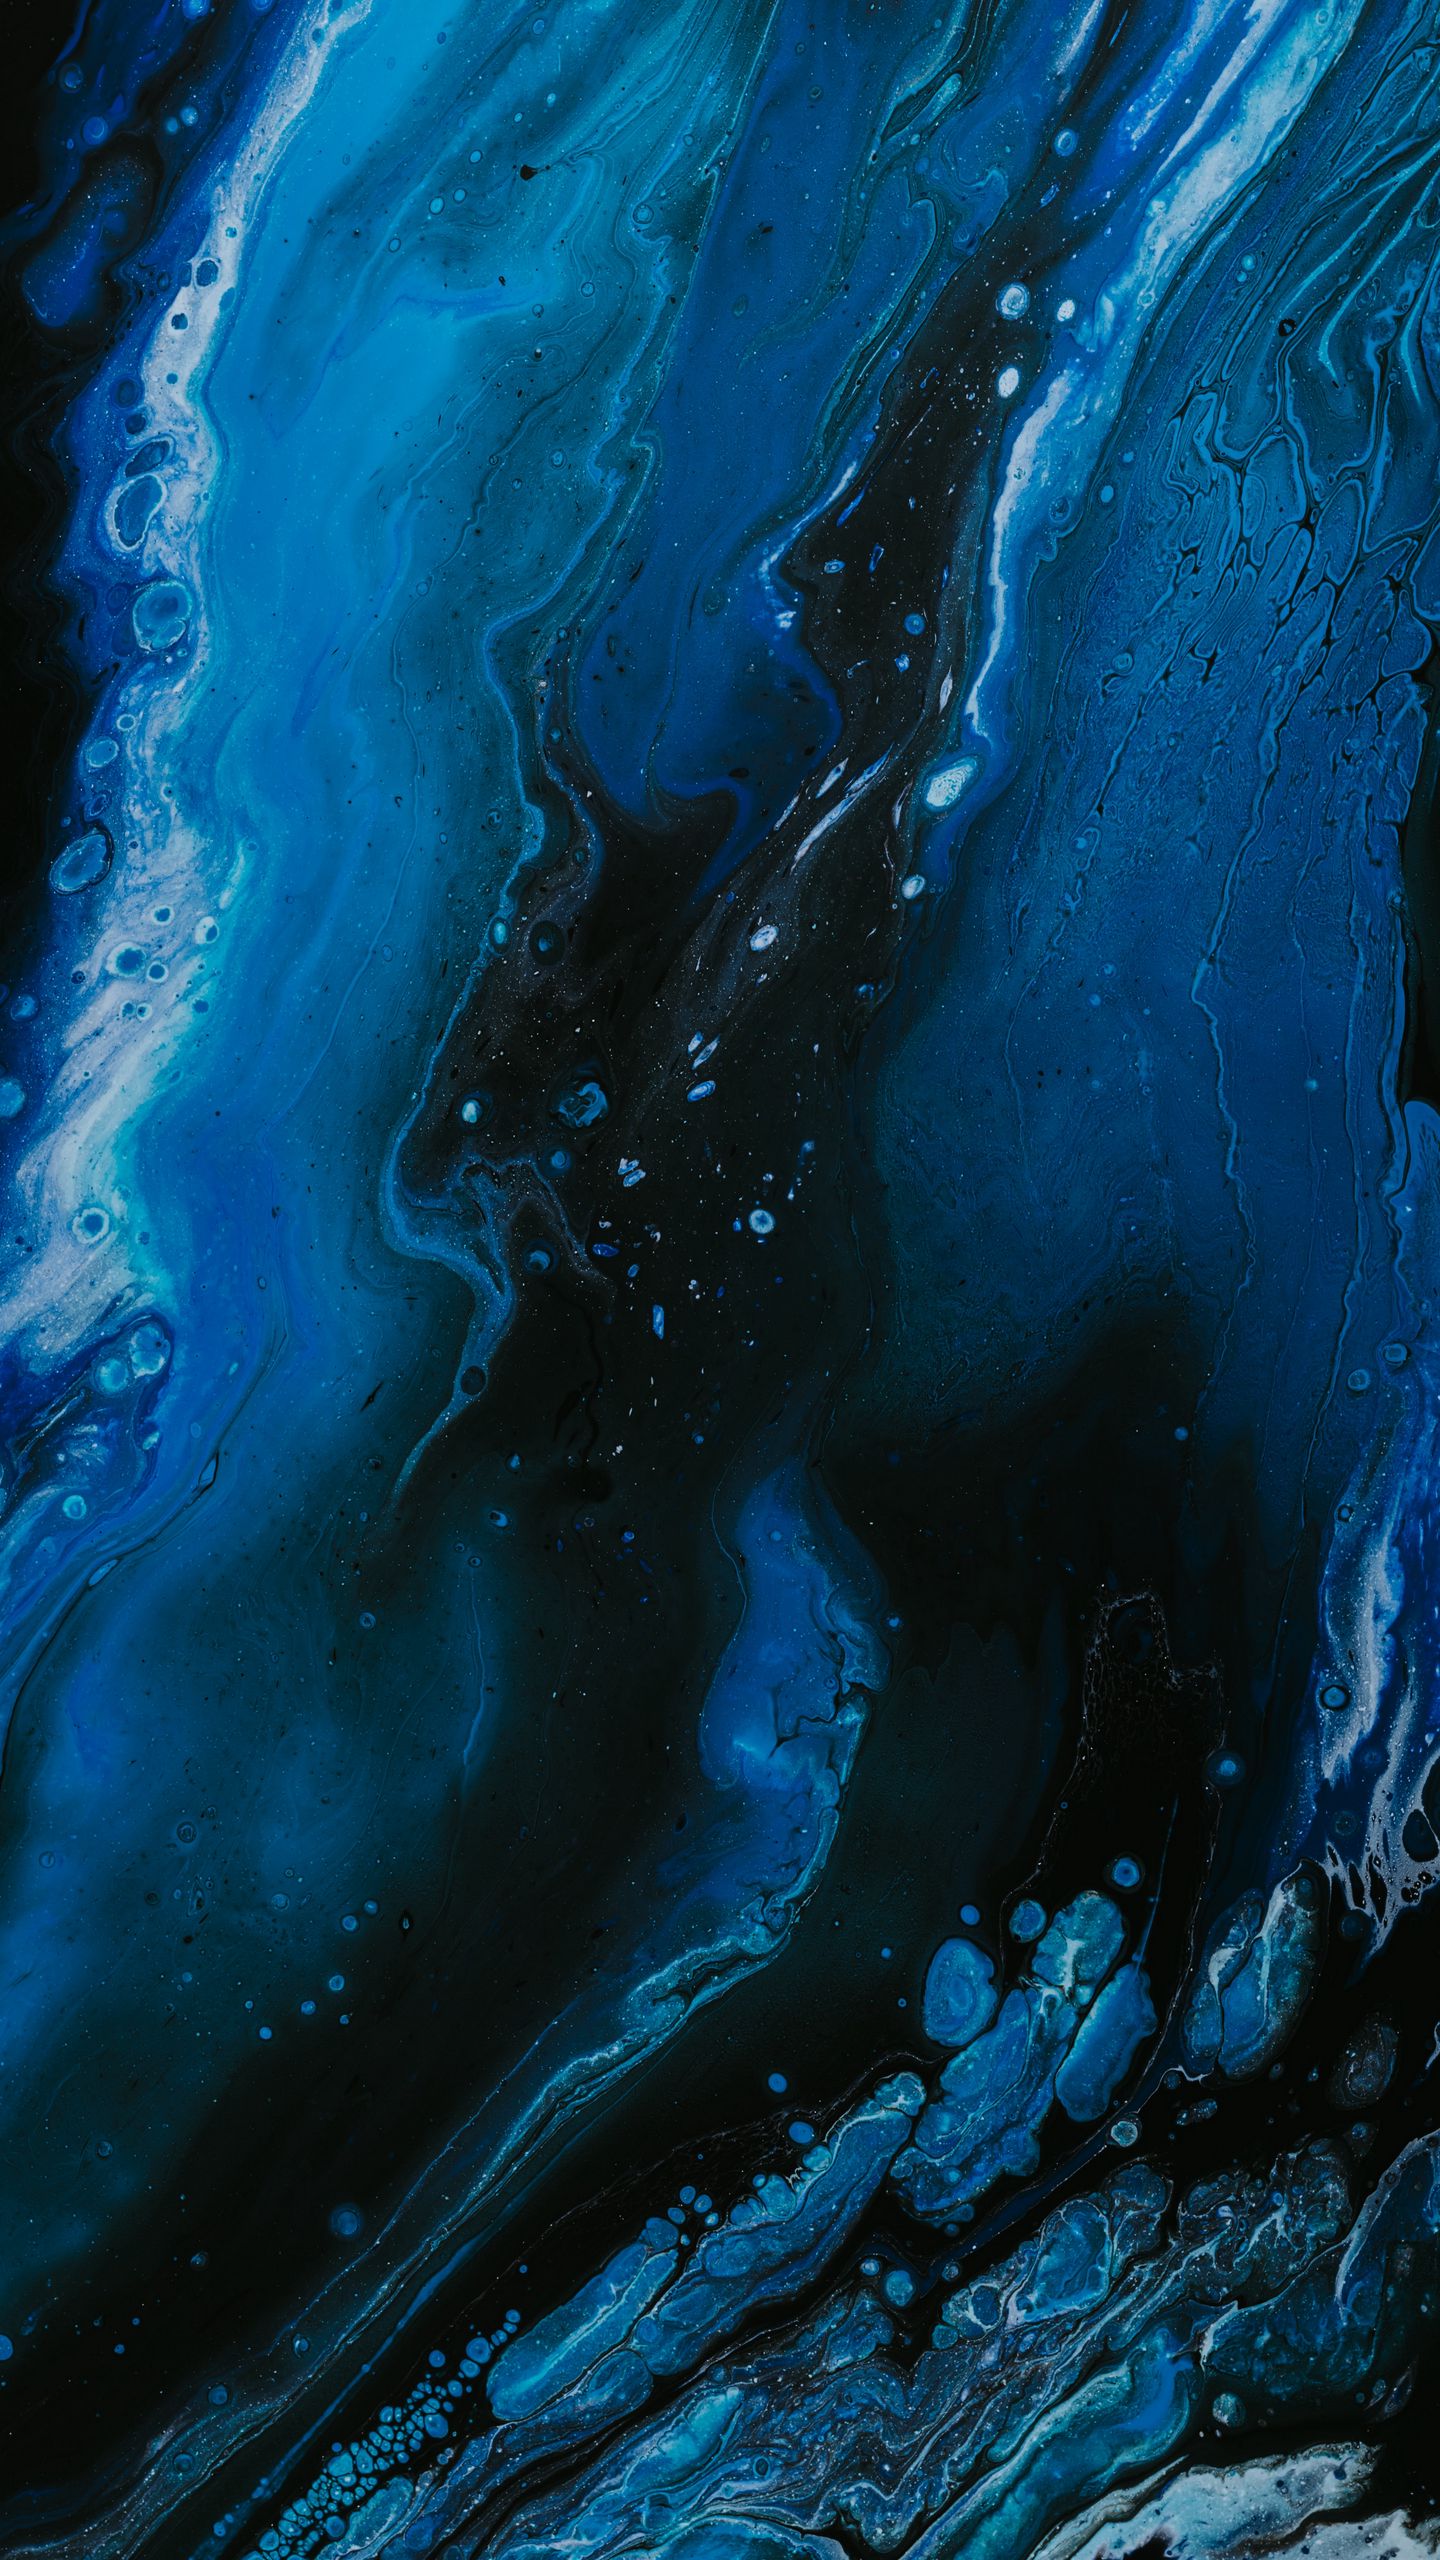 Download wallpaper 1440x2560 paint, fluid art, stains, fifth, blue, black qhd samsung galaxy s s edge, note, lg g4 HD background